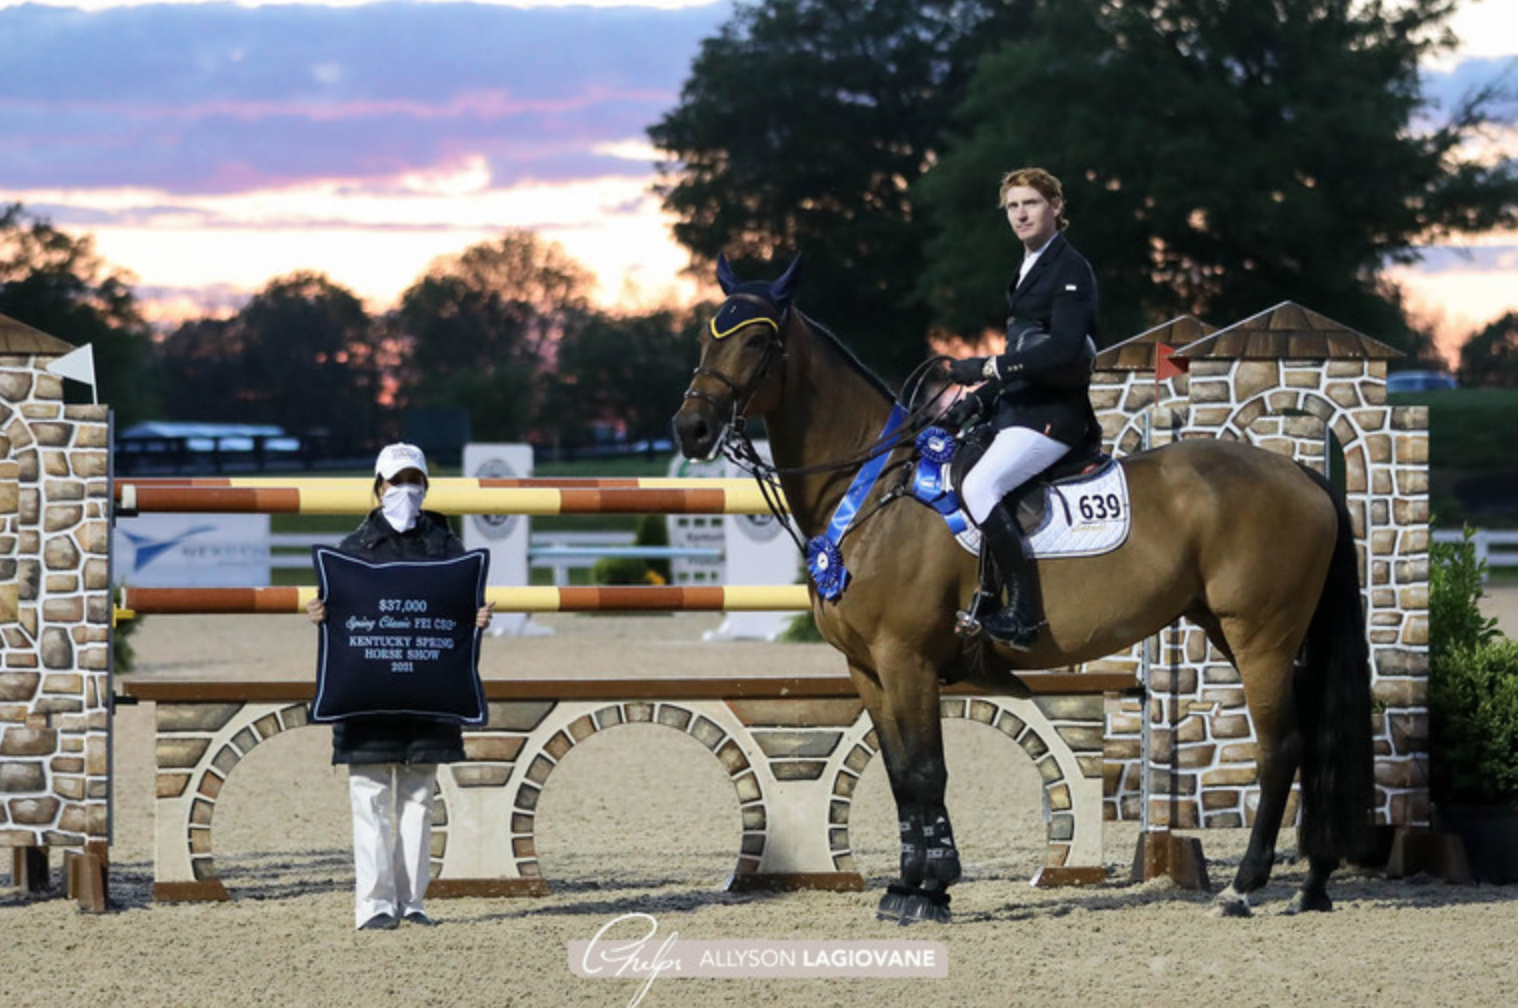 Daniel Coyle and Legacy lead the way in $37,000 1.45m Spring Classic CSI3* at Kentucky Spring Horse Show